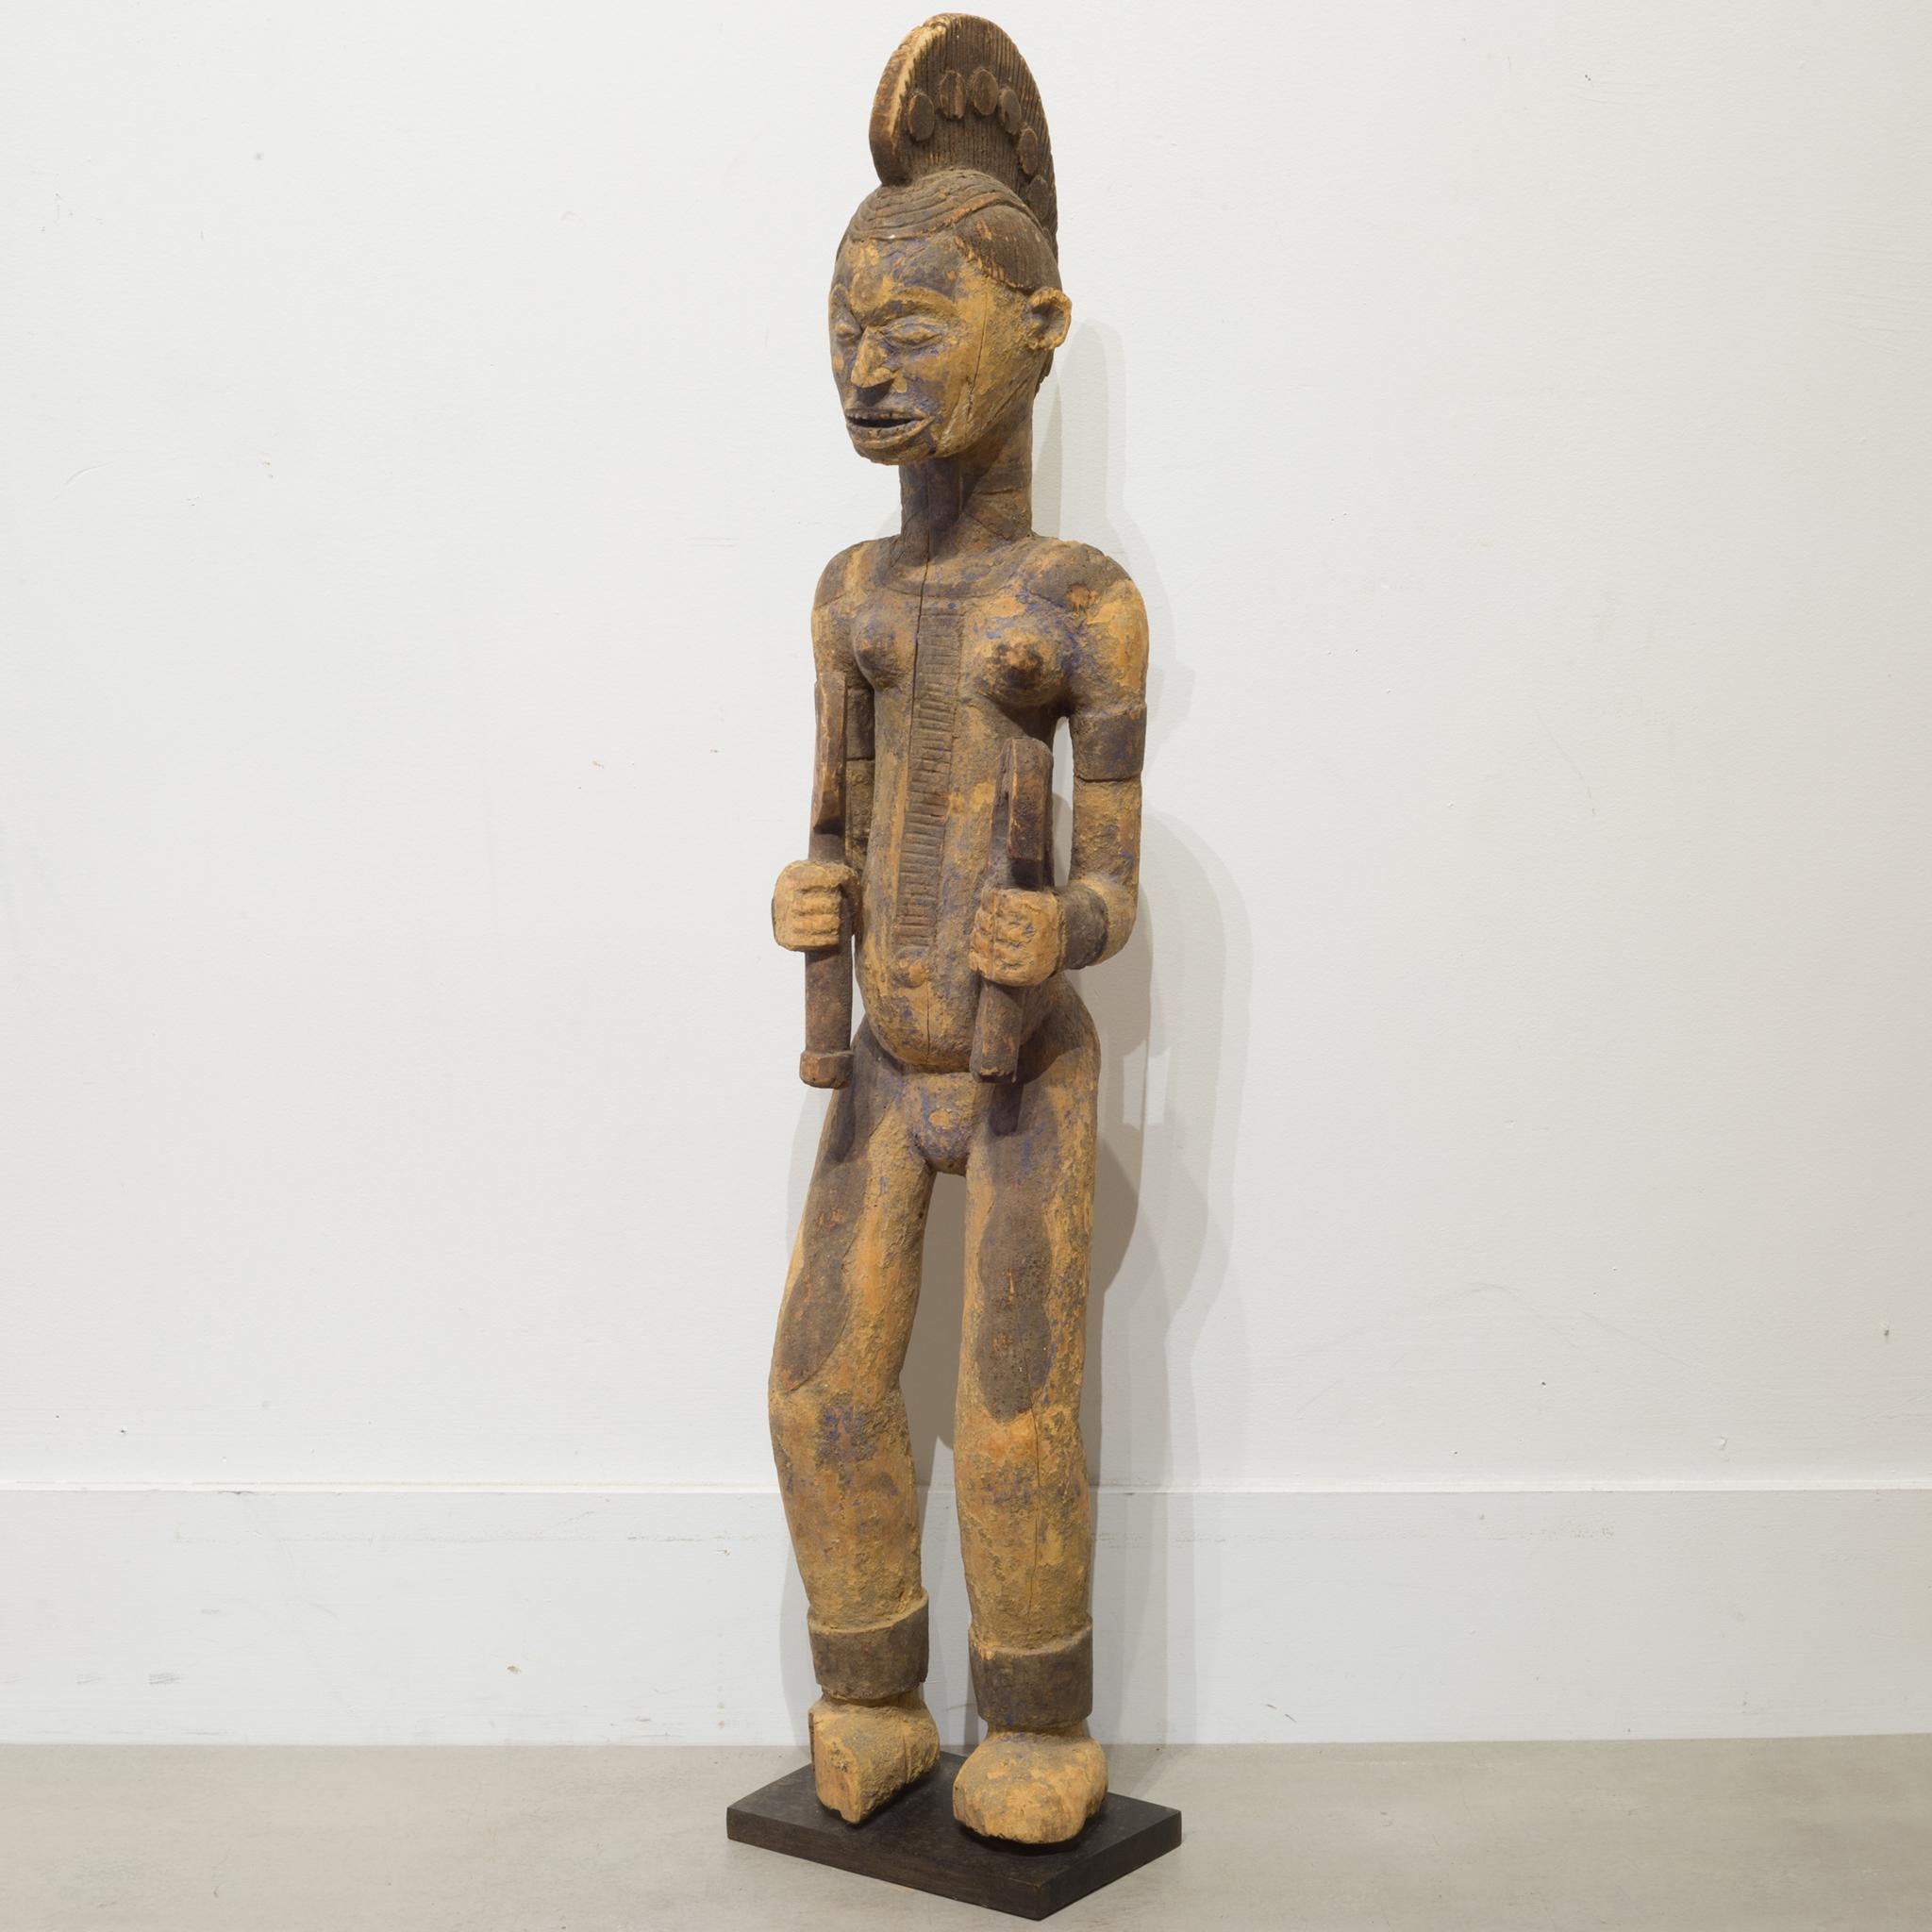 About:

A carved wooden figure from the Igbo Tribe of Nigeria holding two objects.

Creator: Igbo Tribe, Nigeria, Africa.
Date of manufacture: Unknown.
Materials and techniques: Carved wood.
Condition: good. Wear consistent with age and